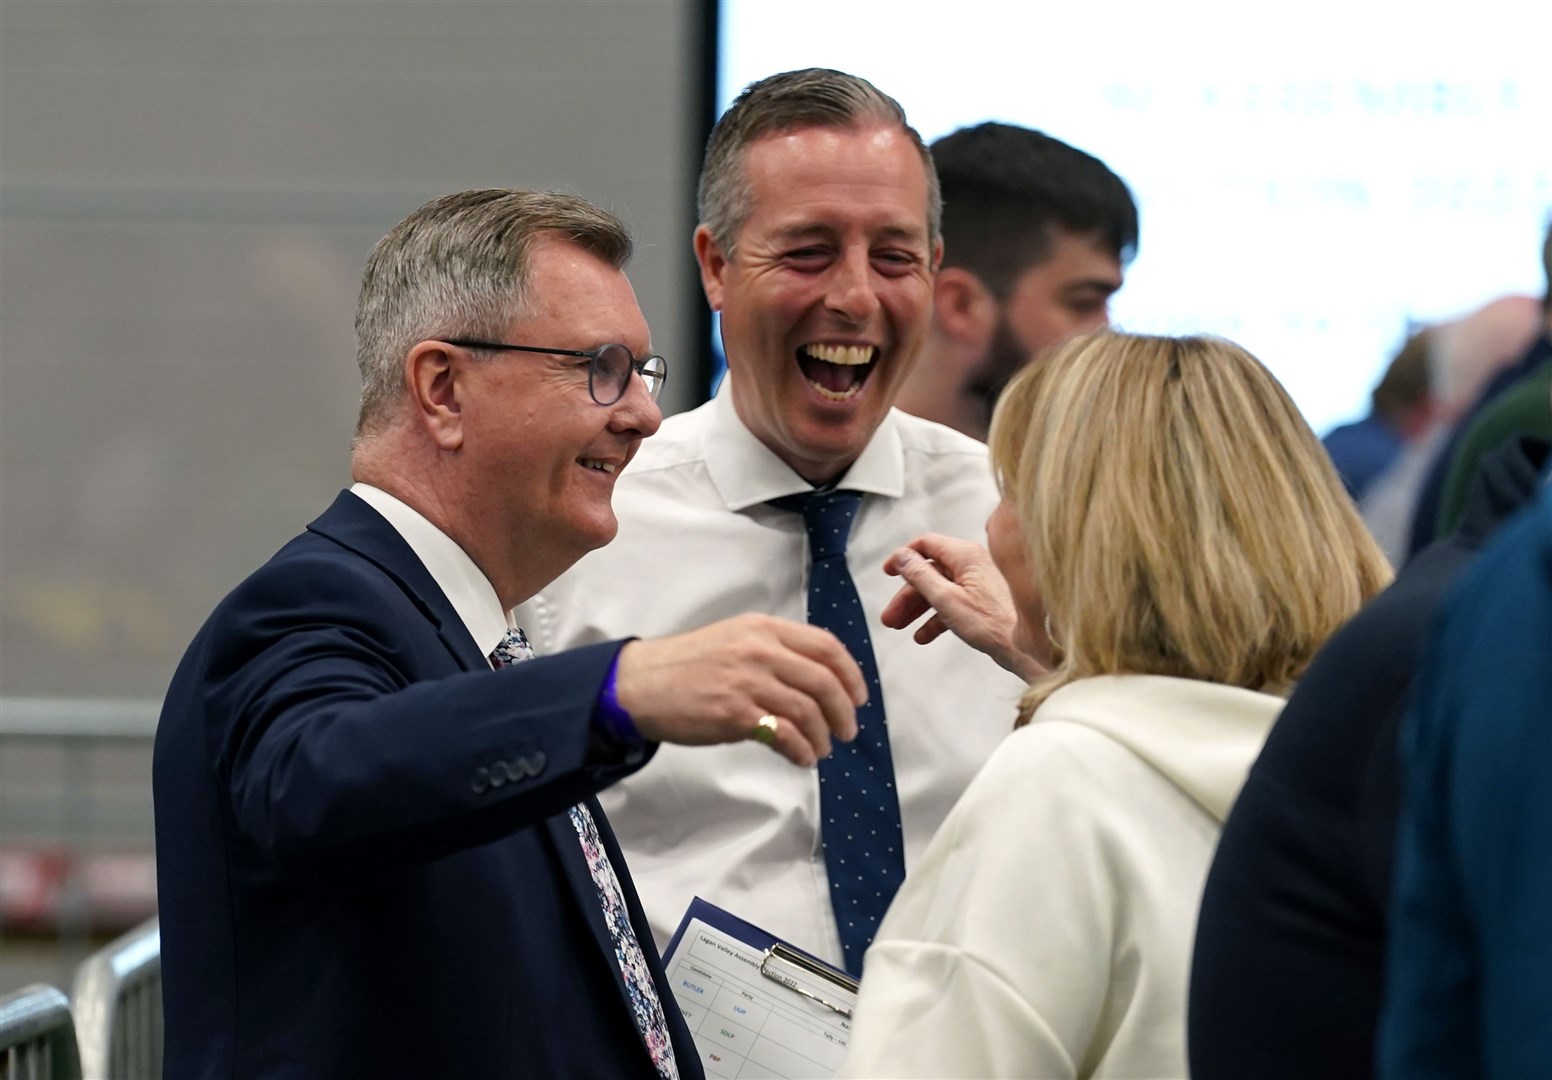 DUP candidates Sir Jeffrey Donaldson and Paul Givan at Ulster University’s Jordanstown count centre in Newtownabbey (Brian Lawless/PA)